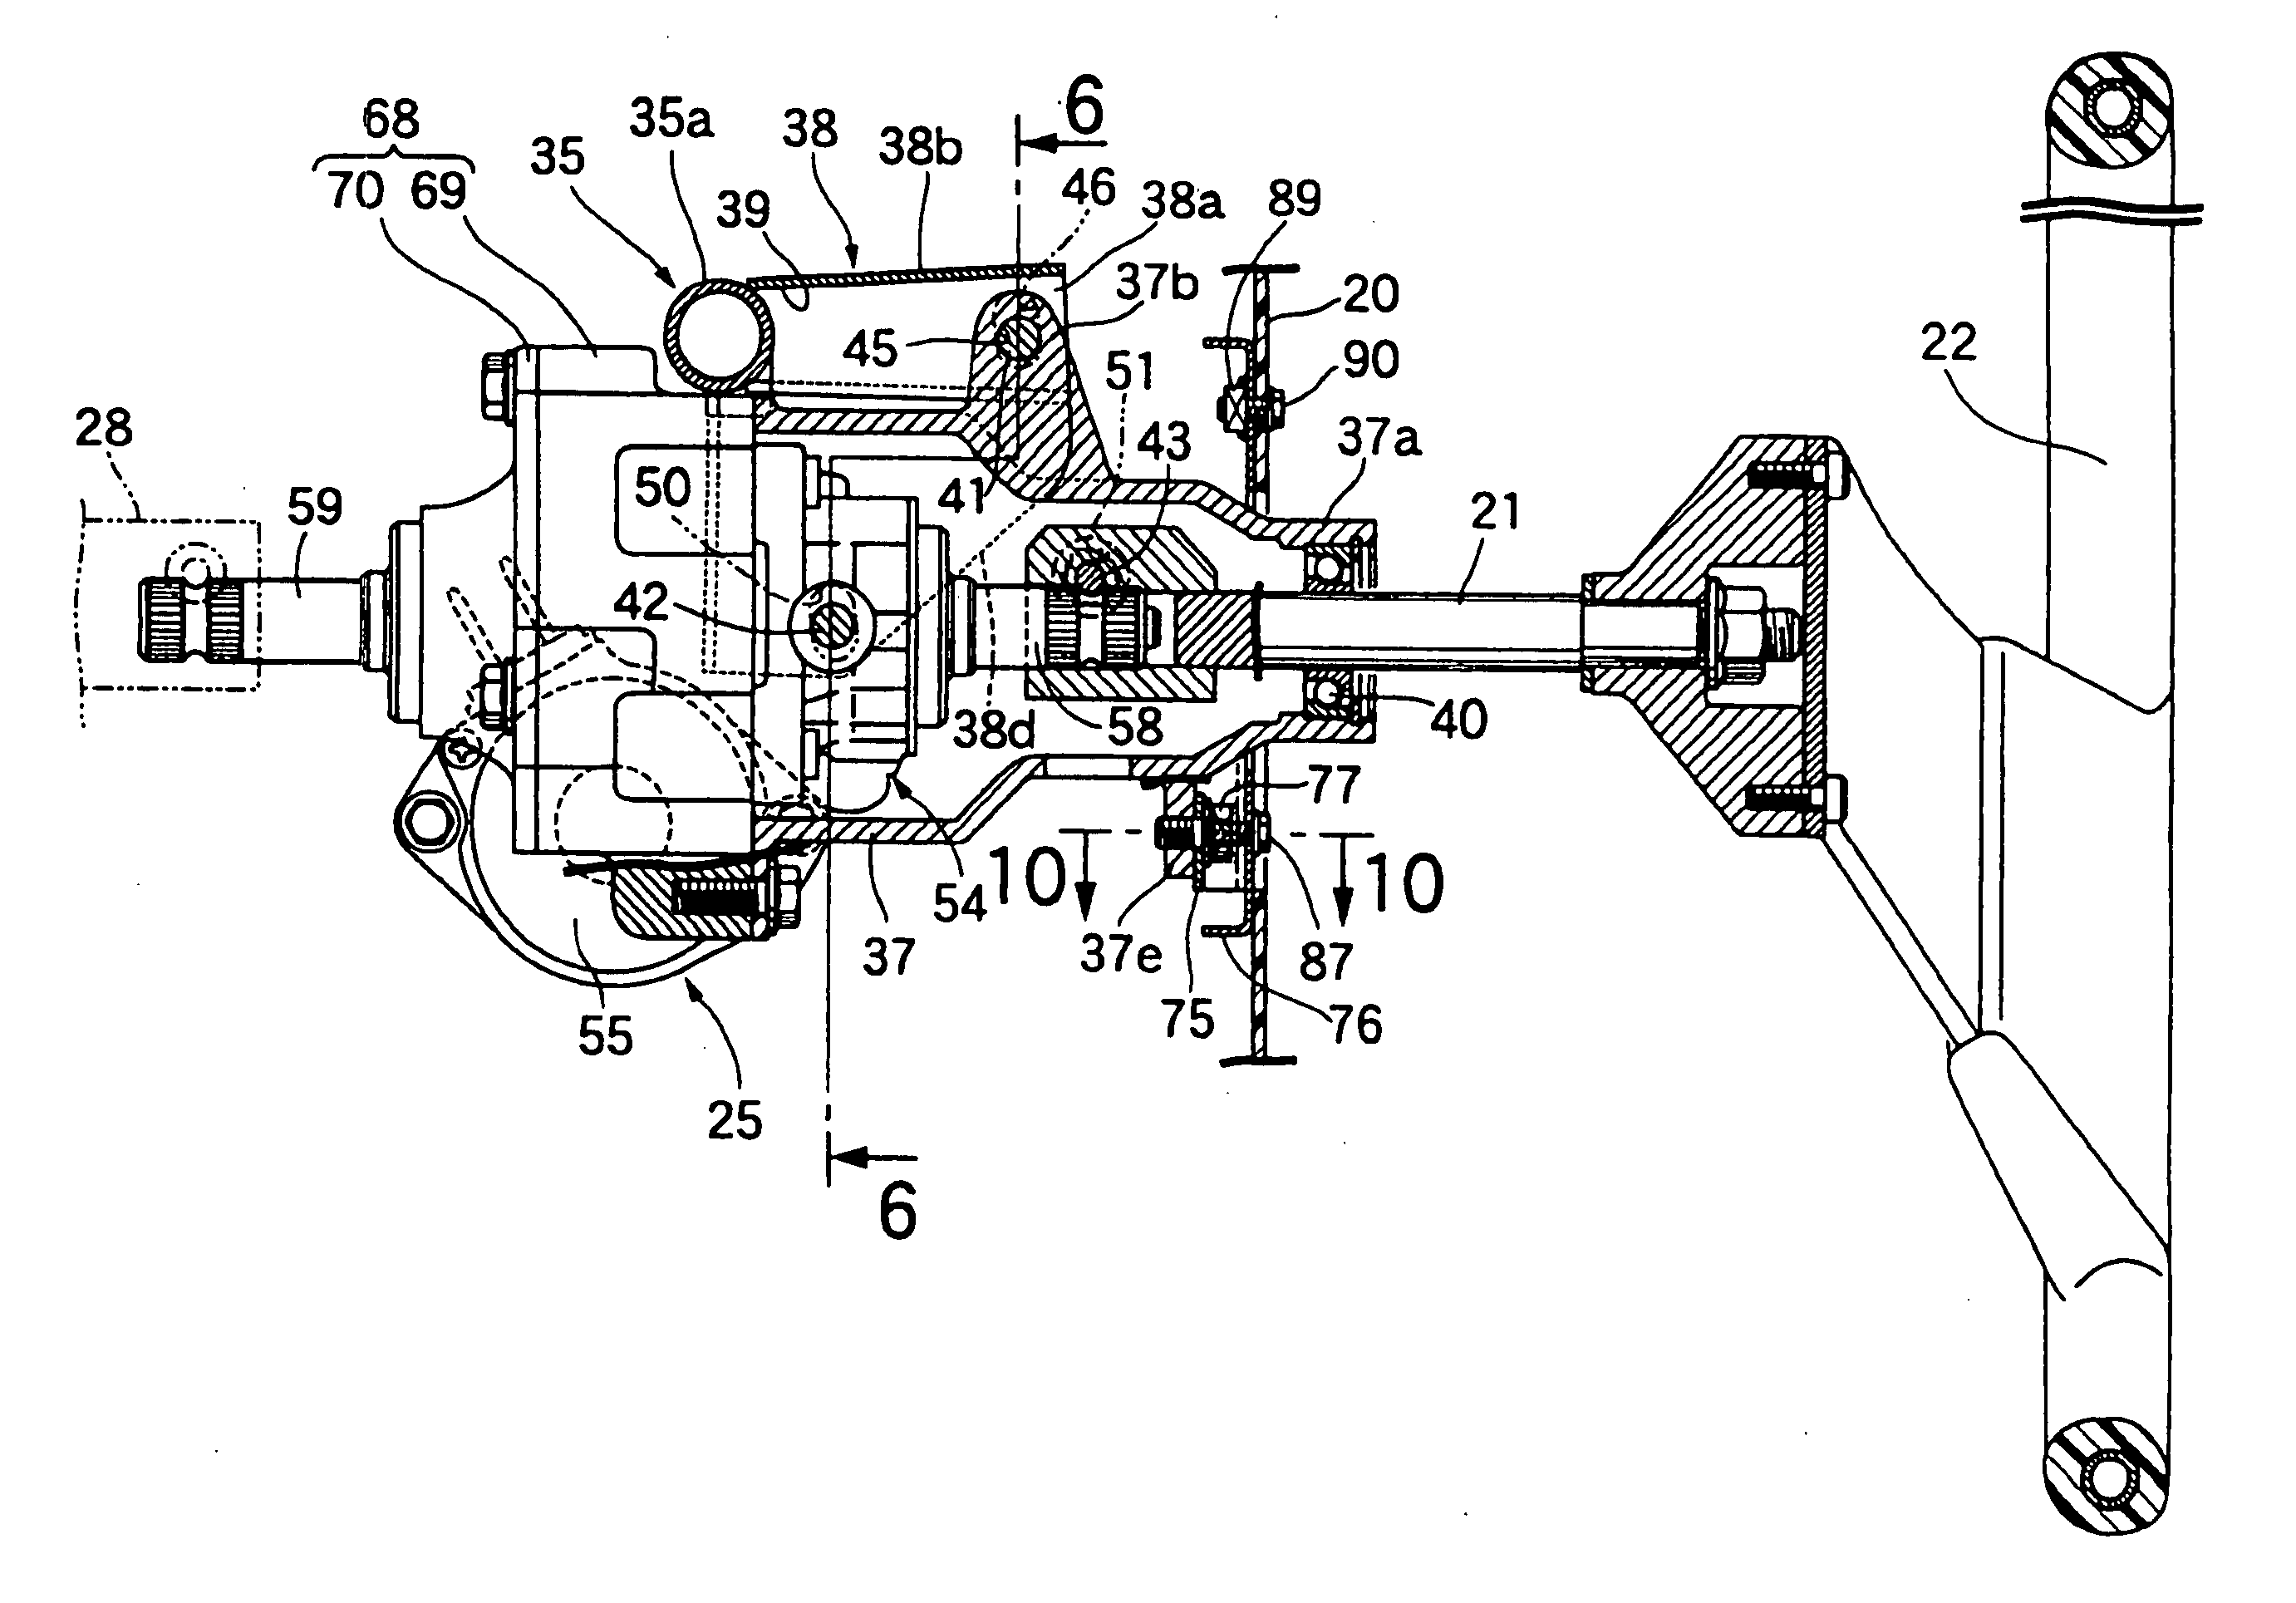 Power steering system for vehicle